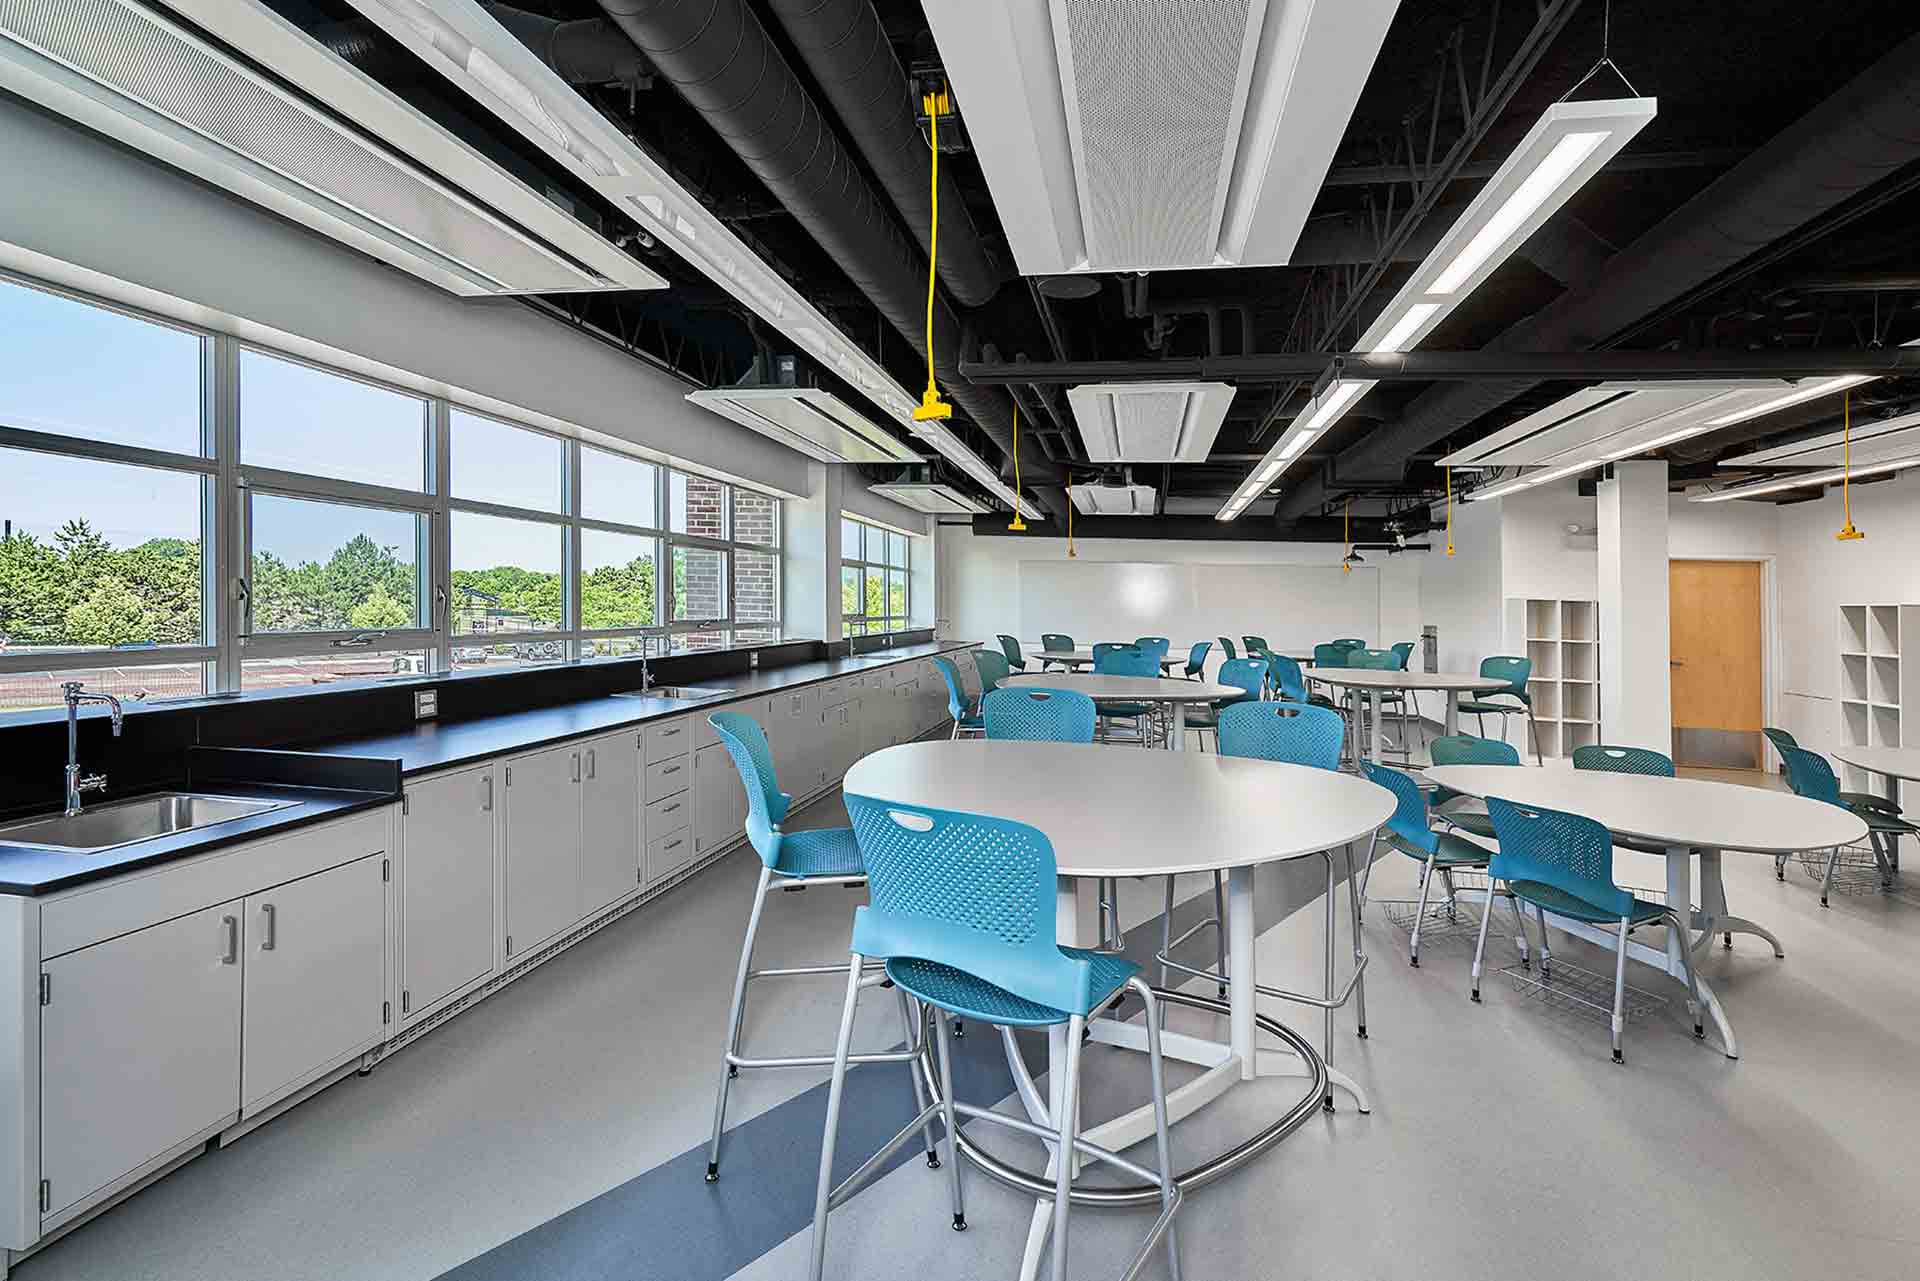 faith-in-the-future-campaign-classroom-with-round-tables-and-blue-chairs